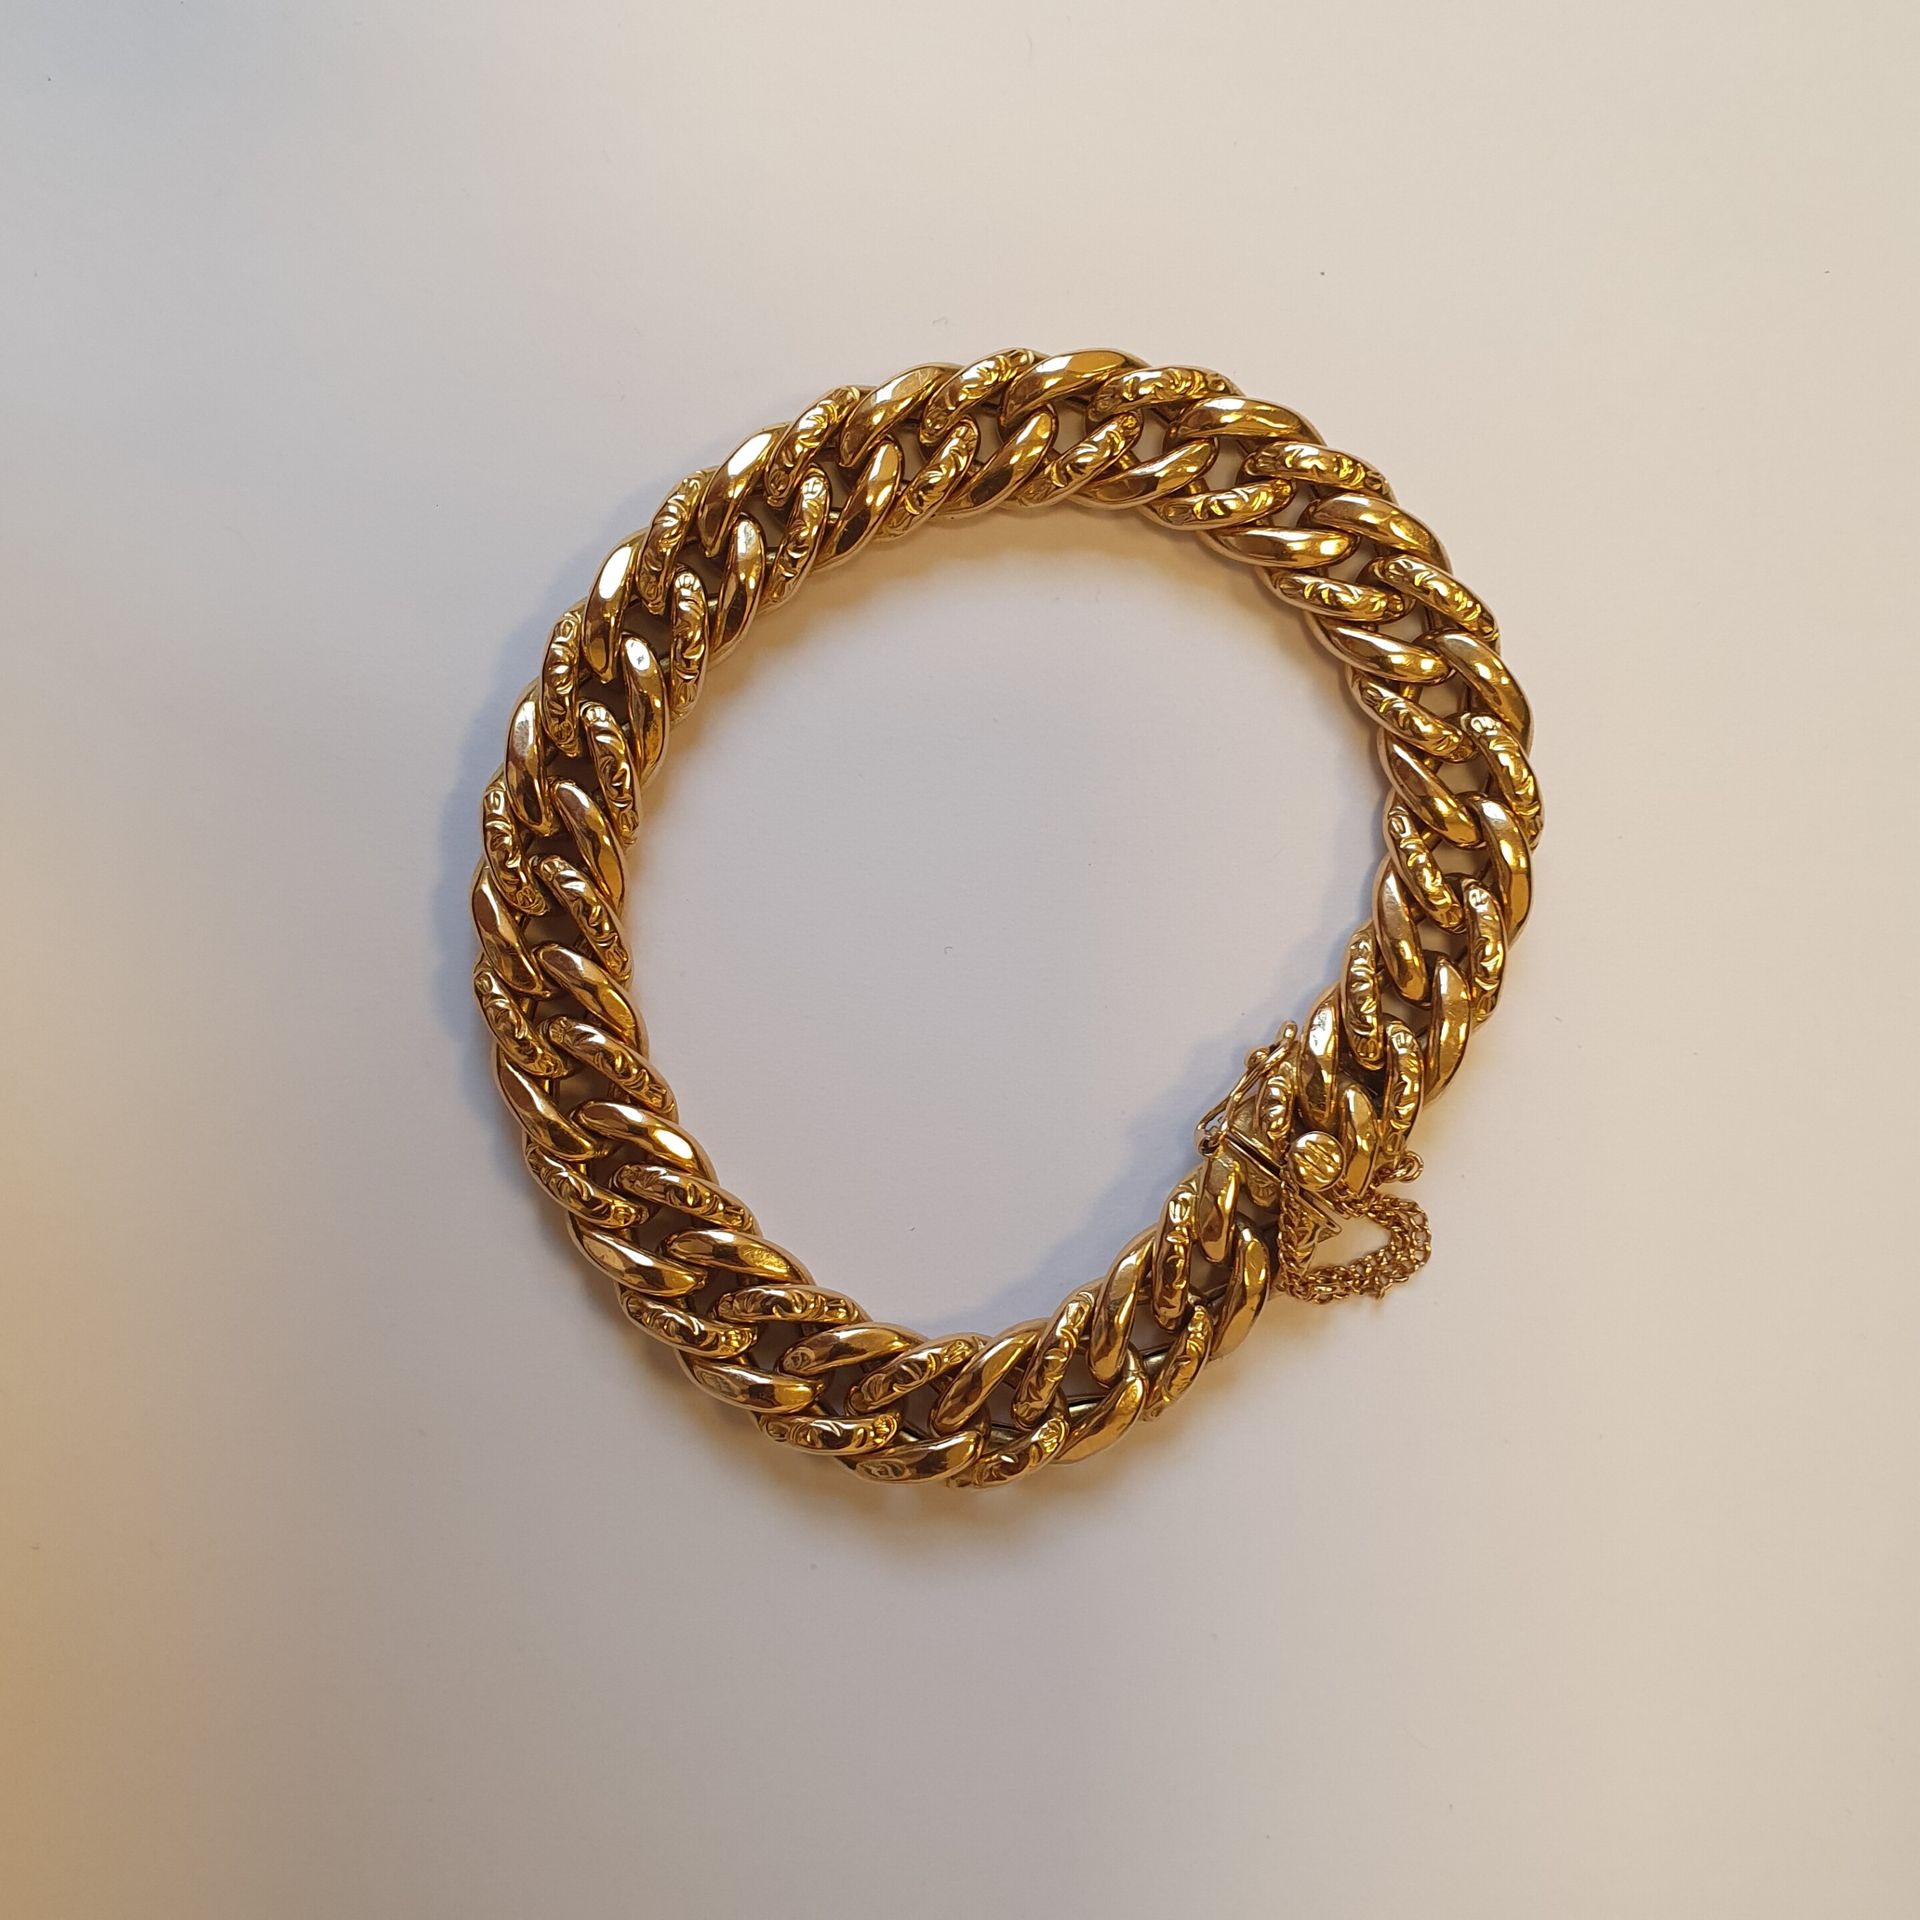 Null Yellow gold bracelet with large links

Weight : 27 g